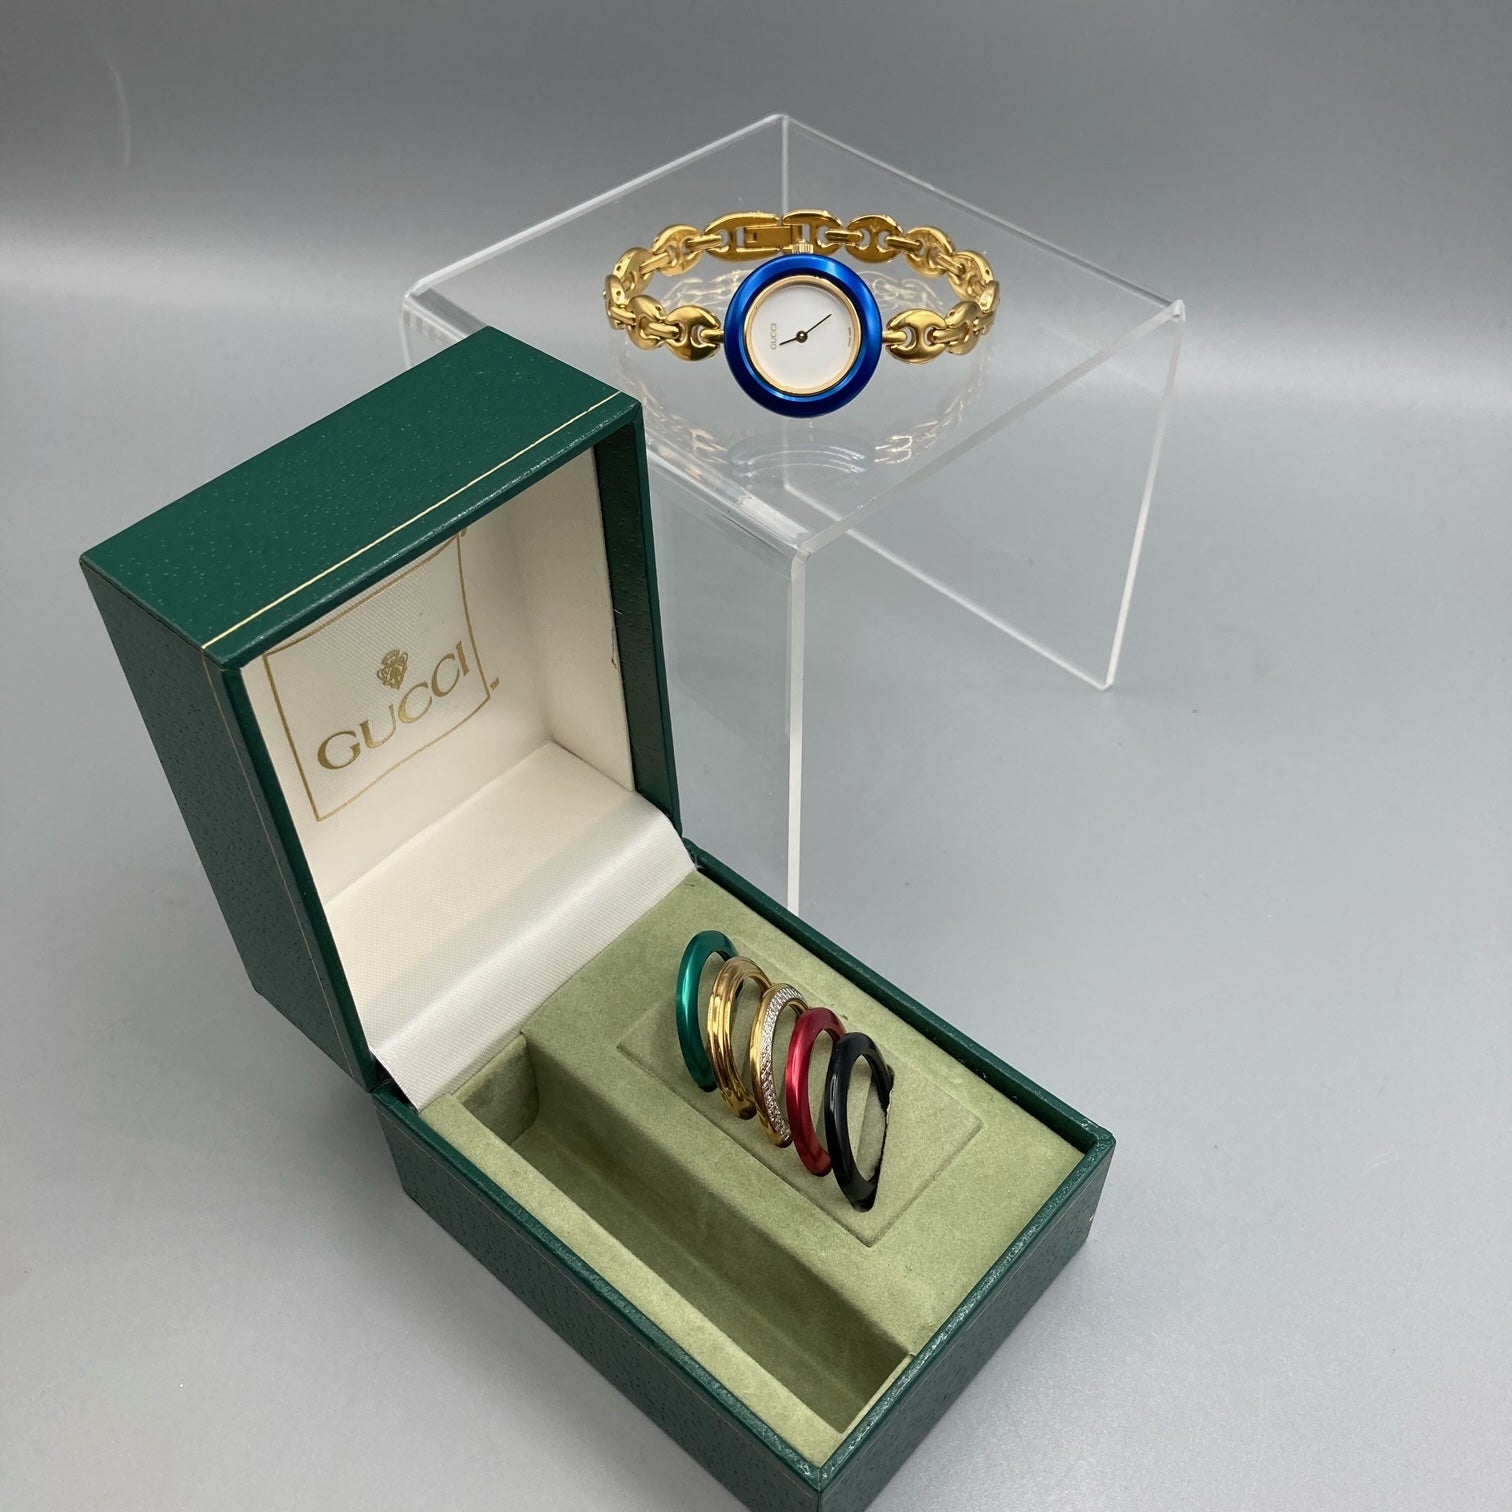 Genuine Vintage Gucci Change Bezel Watch With Box and Bezels 11/12.2